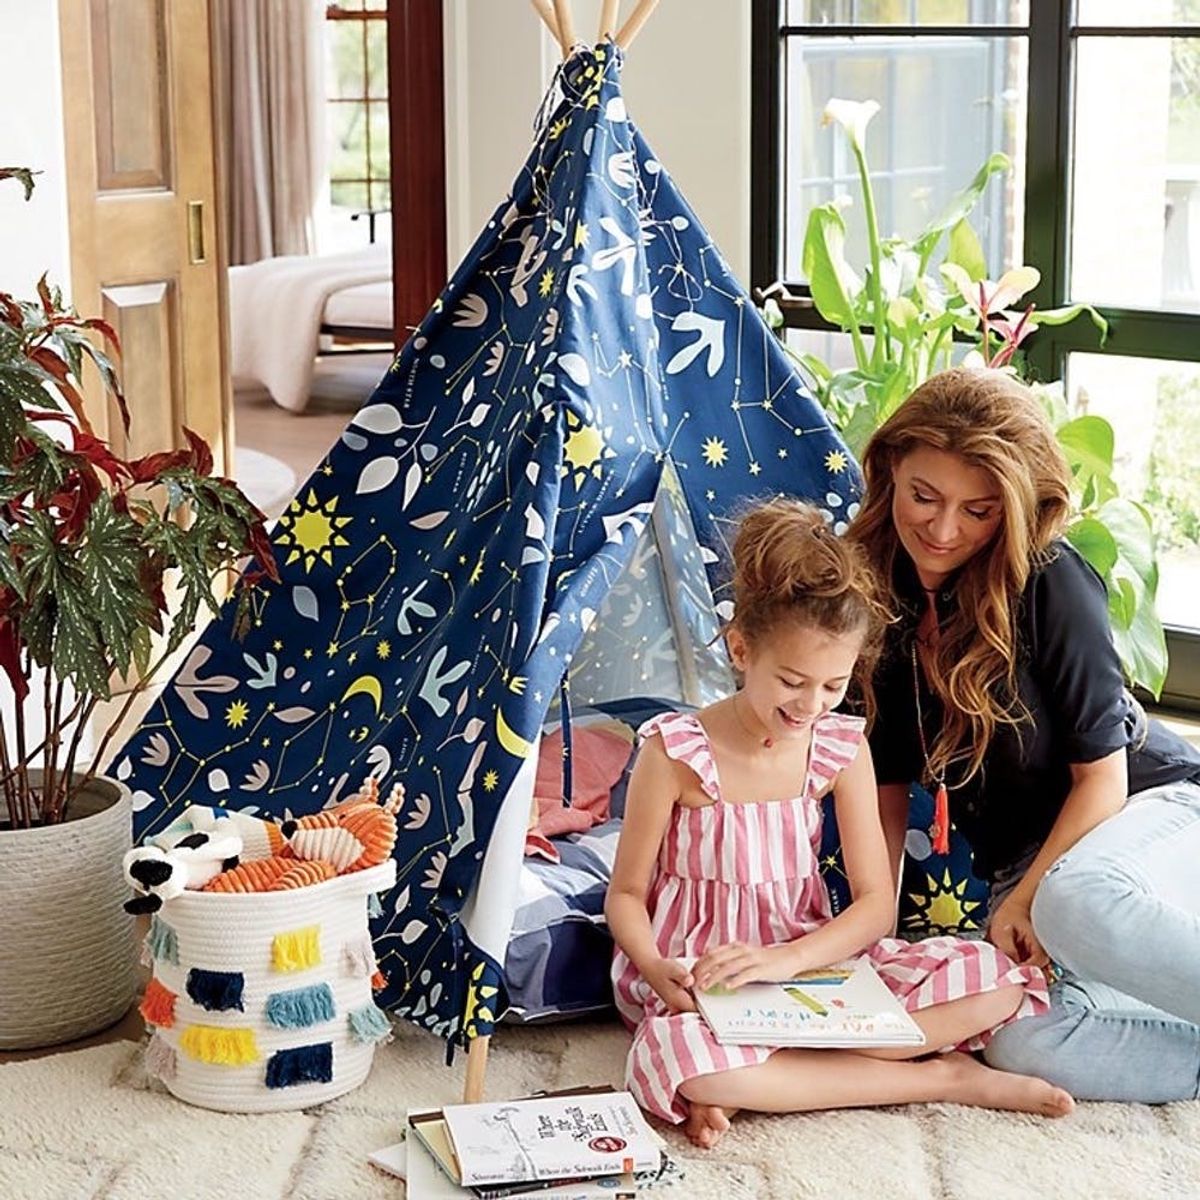 Genevieve Gorder’s Land of Nod Nursery Collection Is Out of the World